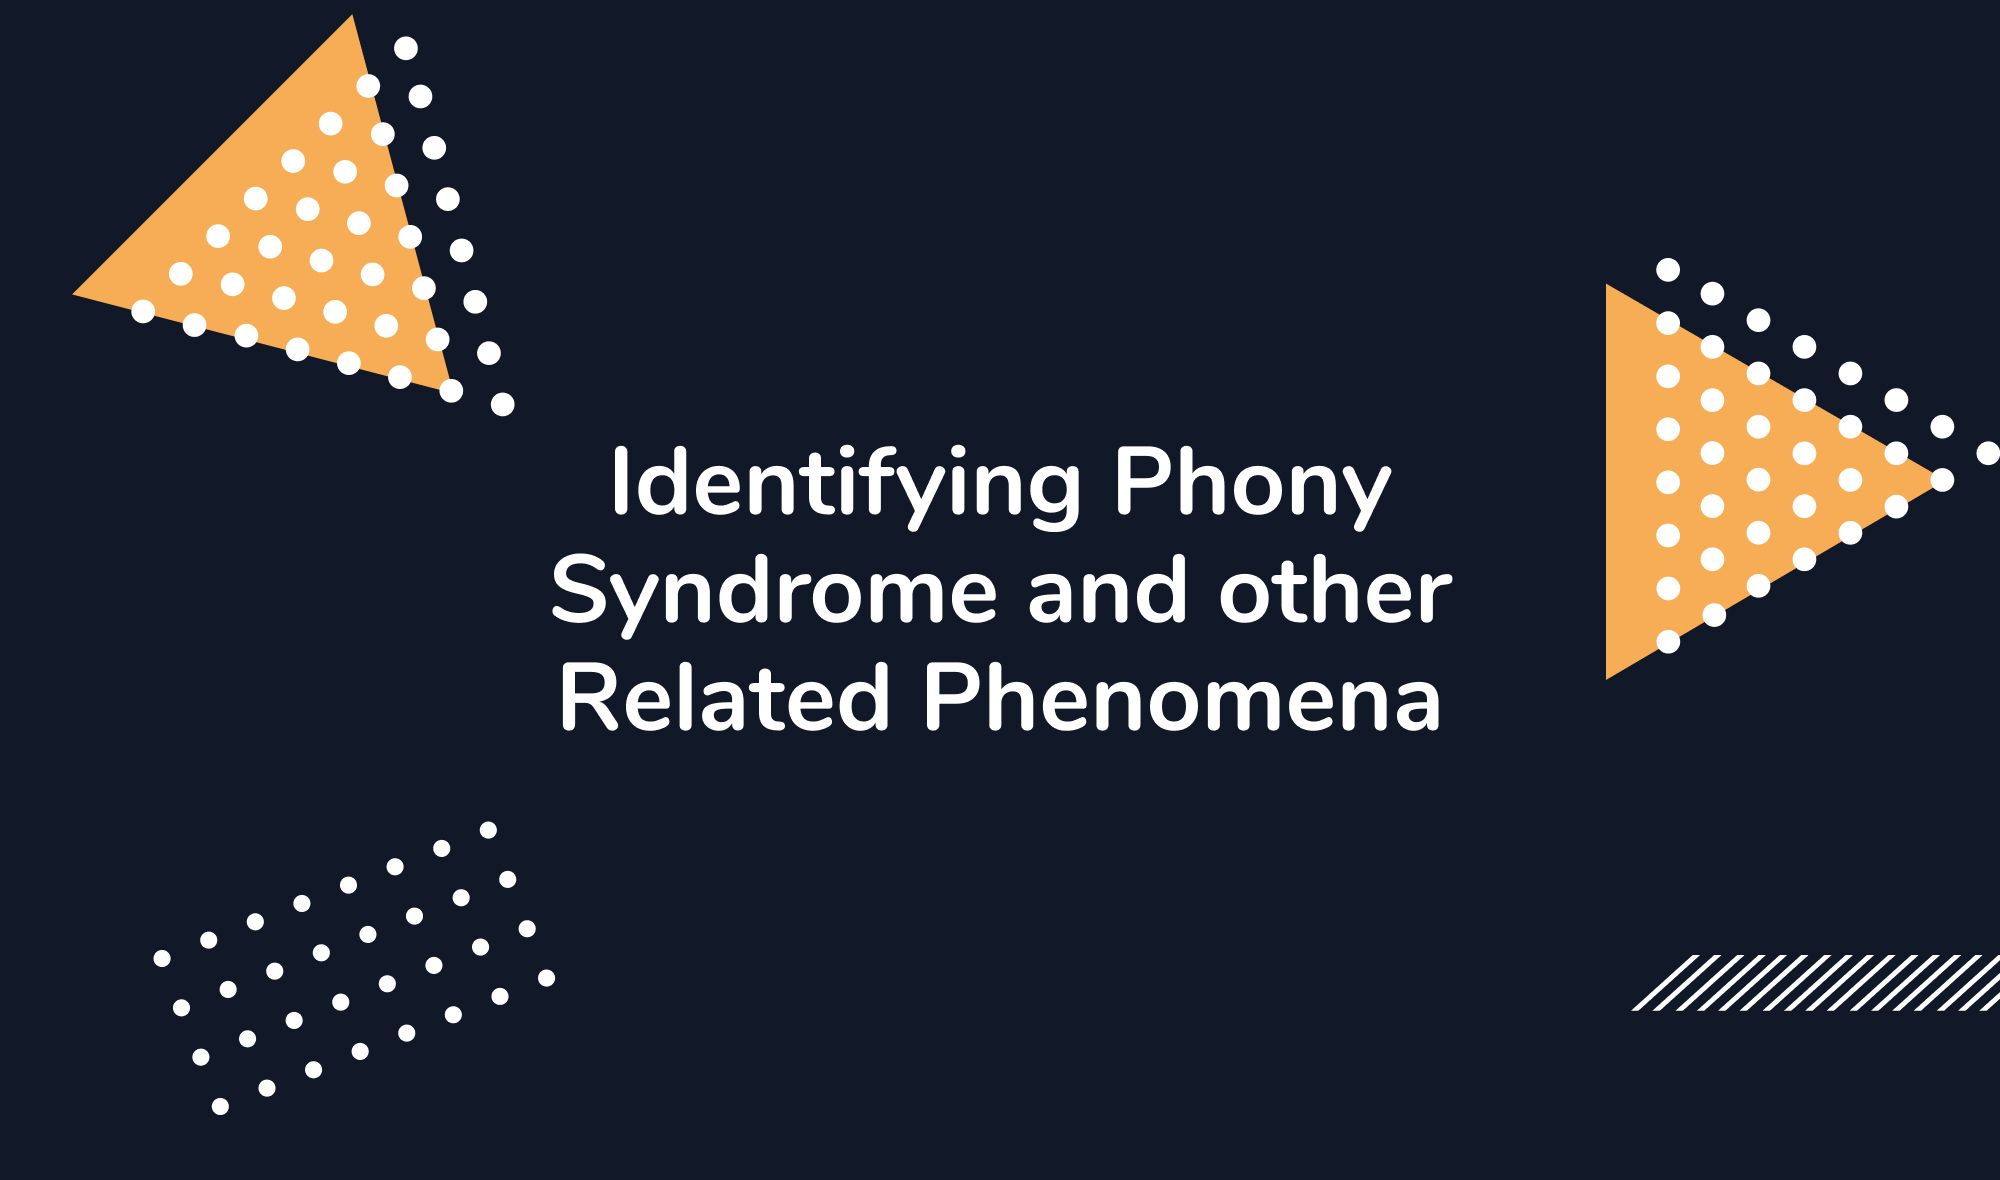 Identifying Phony Syndrome and other Related Phenomena